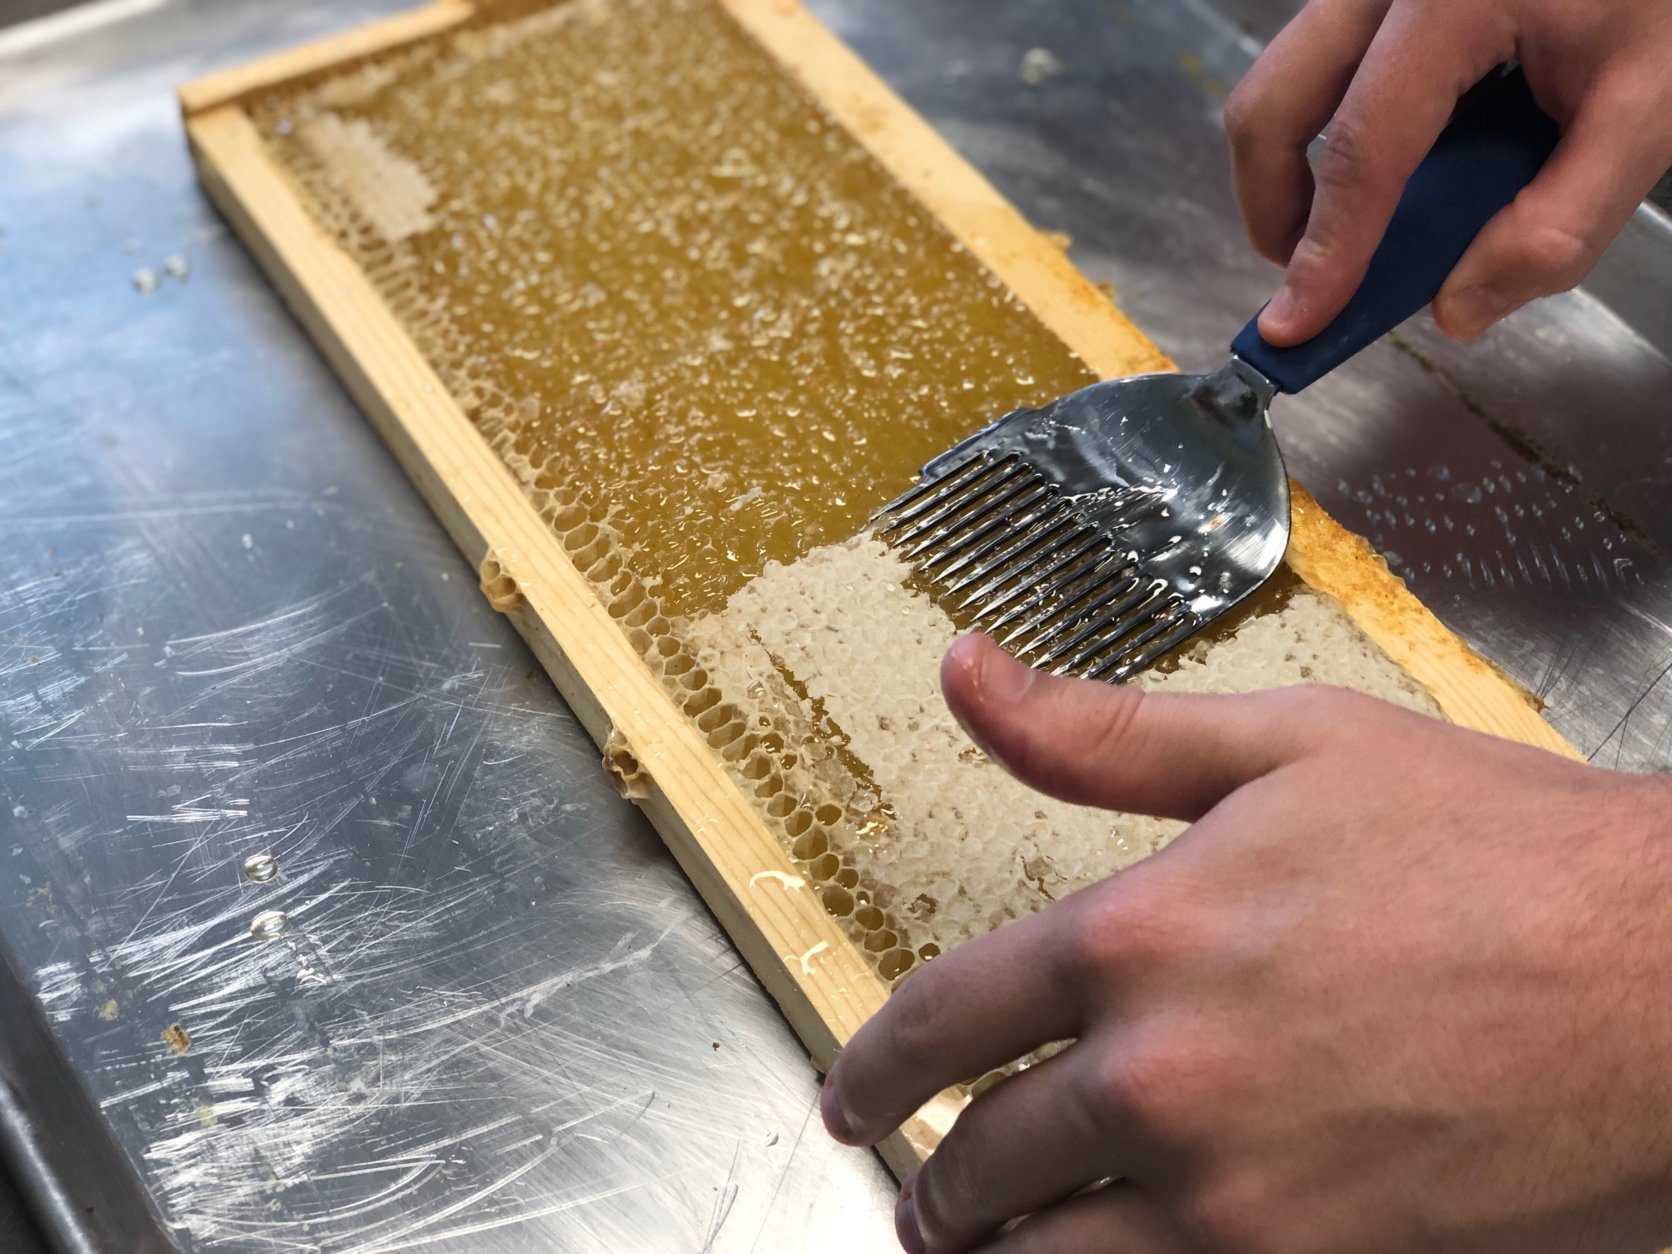 Participants remove an outer layer of wax before scraping off the honey made on the farm, which is on a small plot of land just off Mississippi Avenue in Southeast, D.C. (WTOP/Rachel Nania)